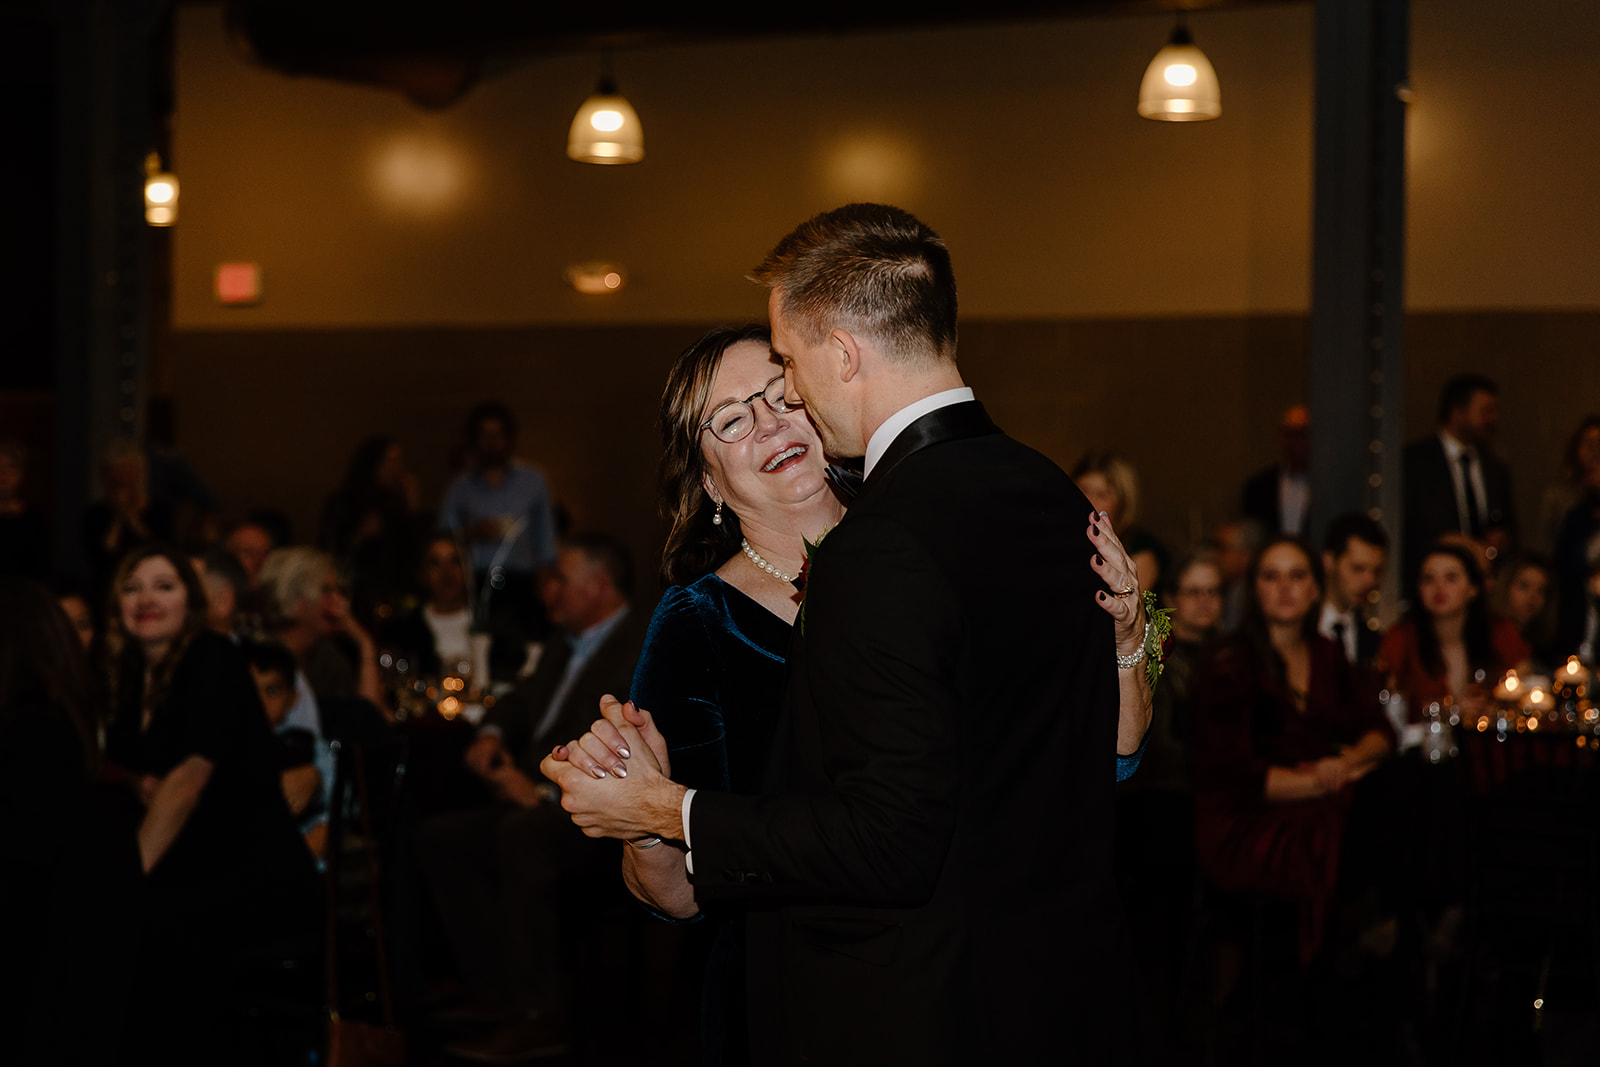 Groom and his mother dancing on the dance floor